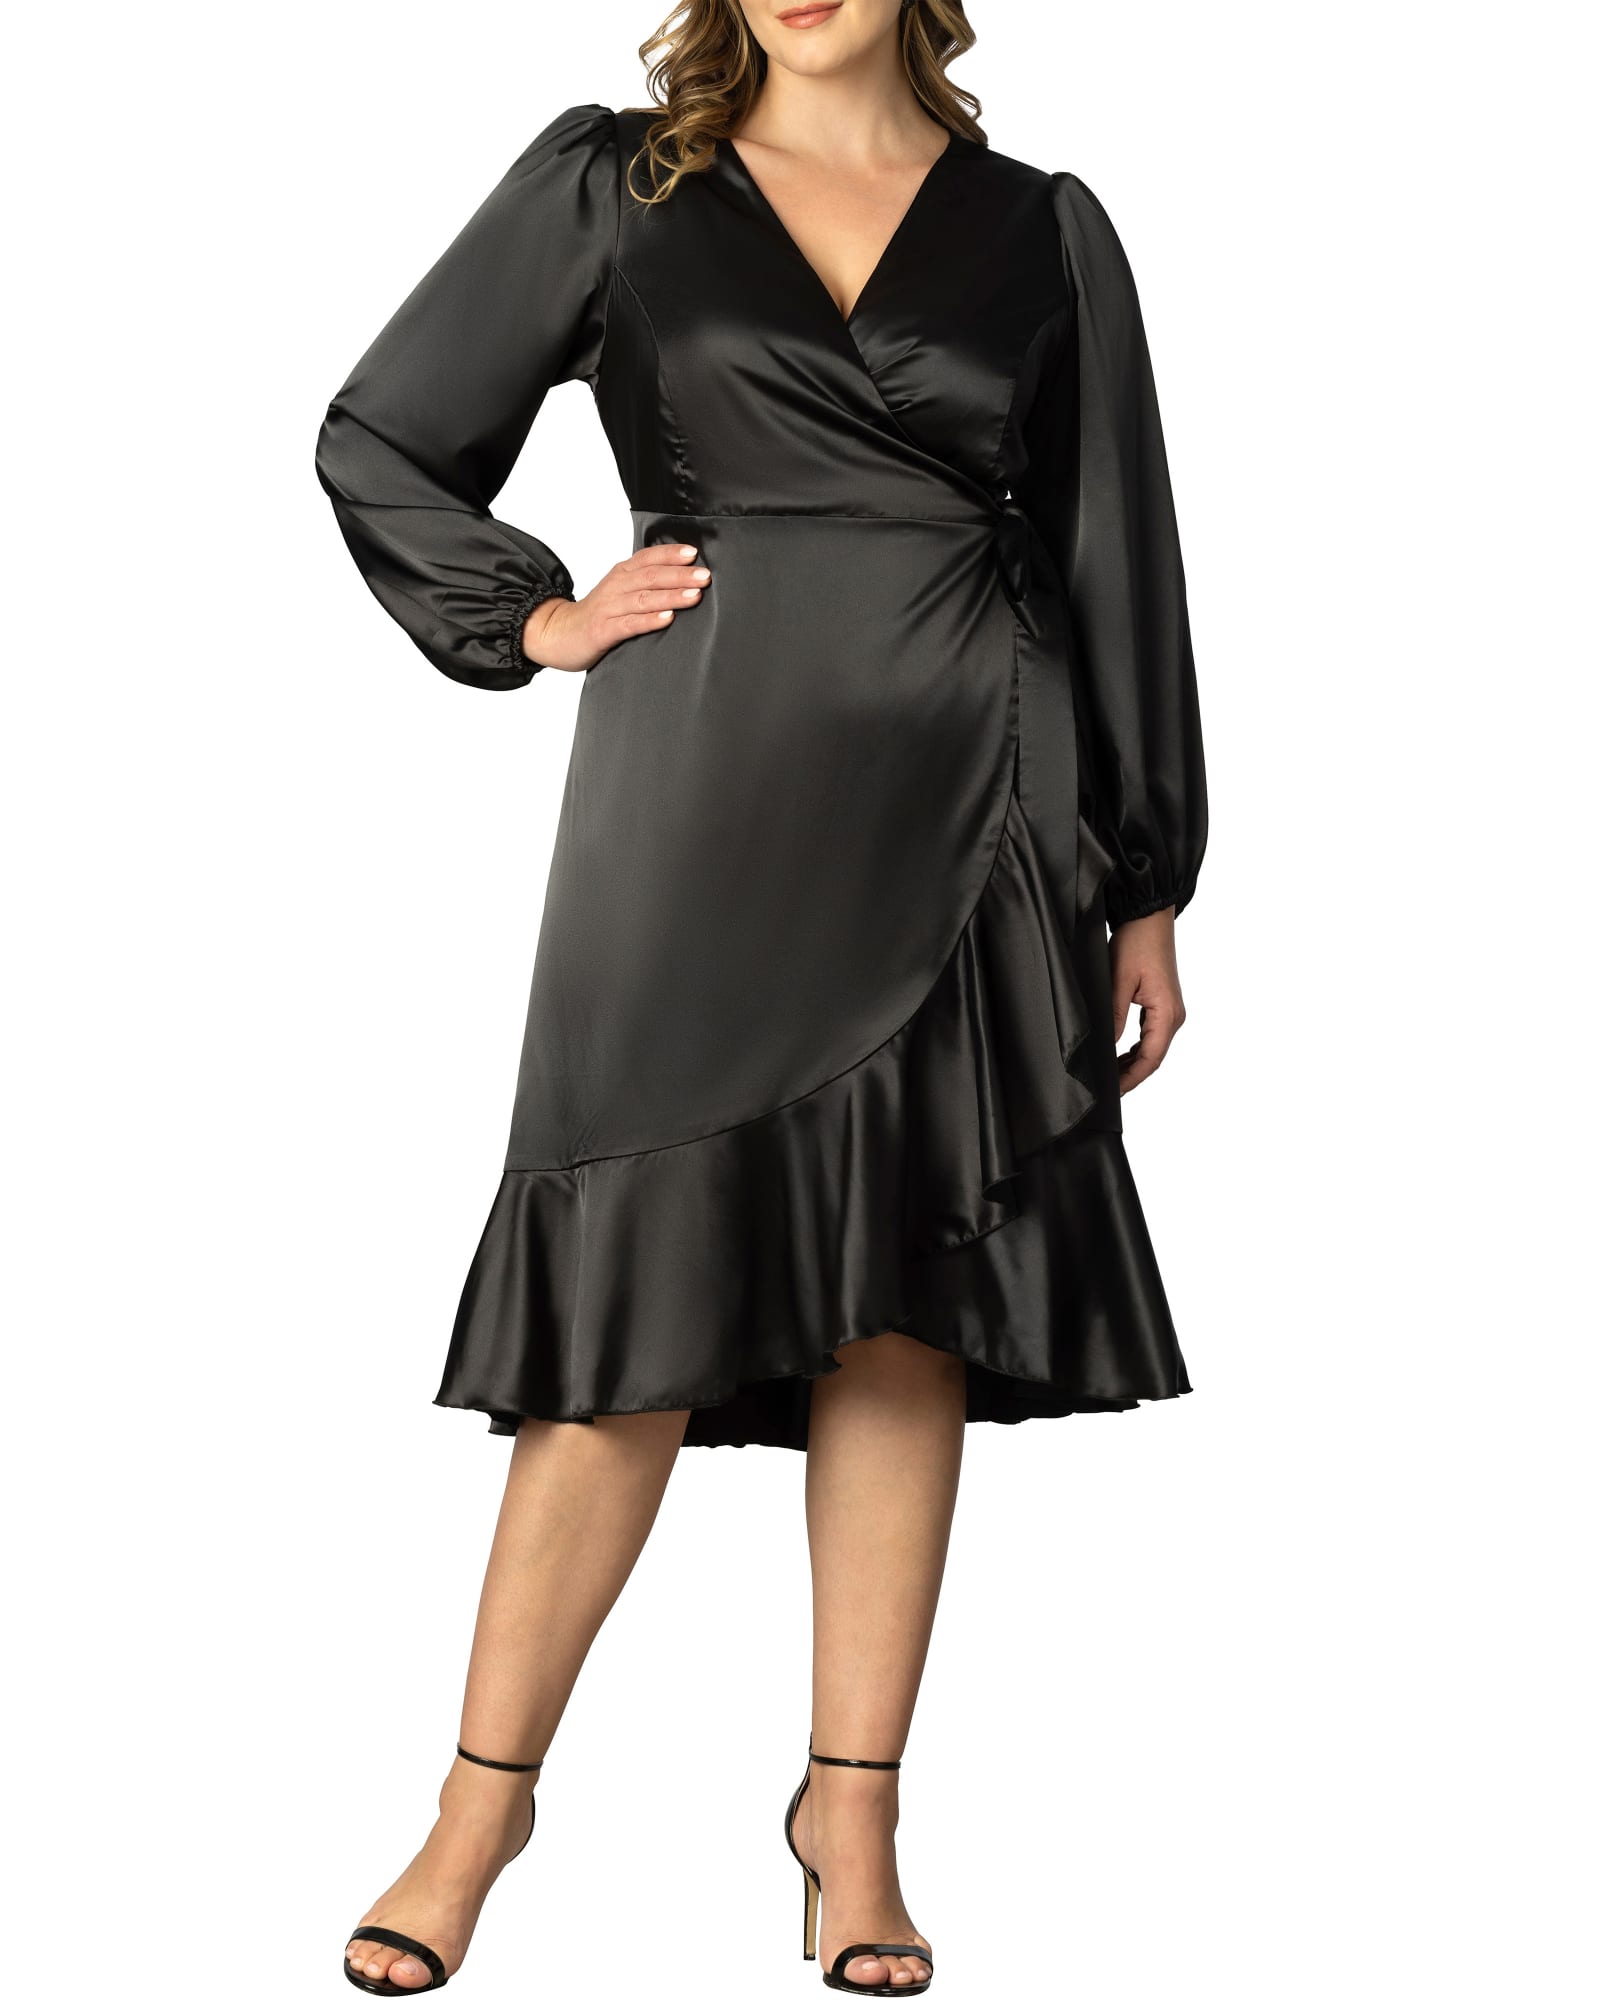 Plus Size Holiday Party Outfits